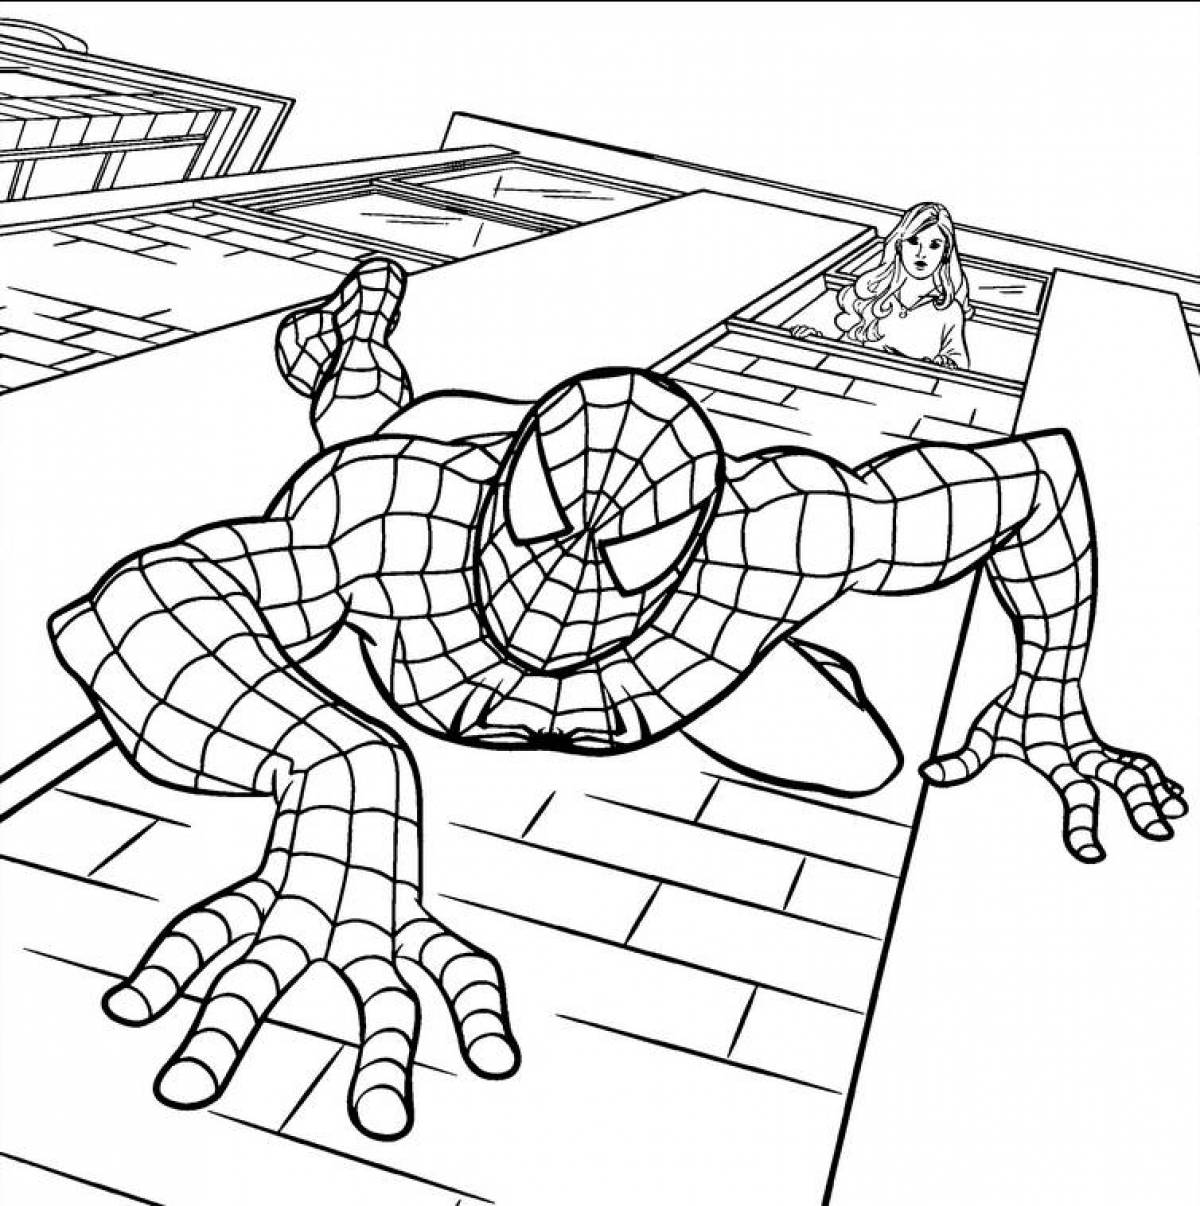 The amazing spiderman coloring pages for boys